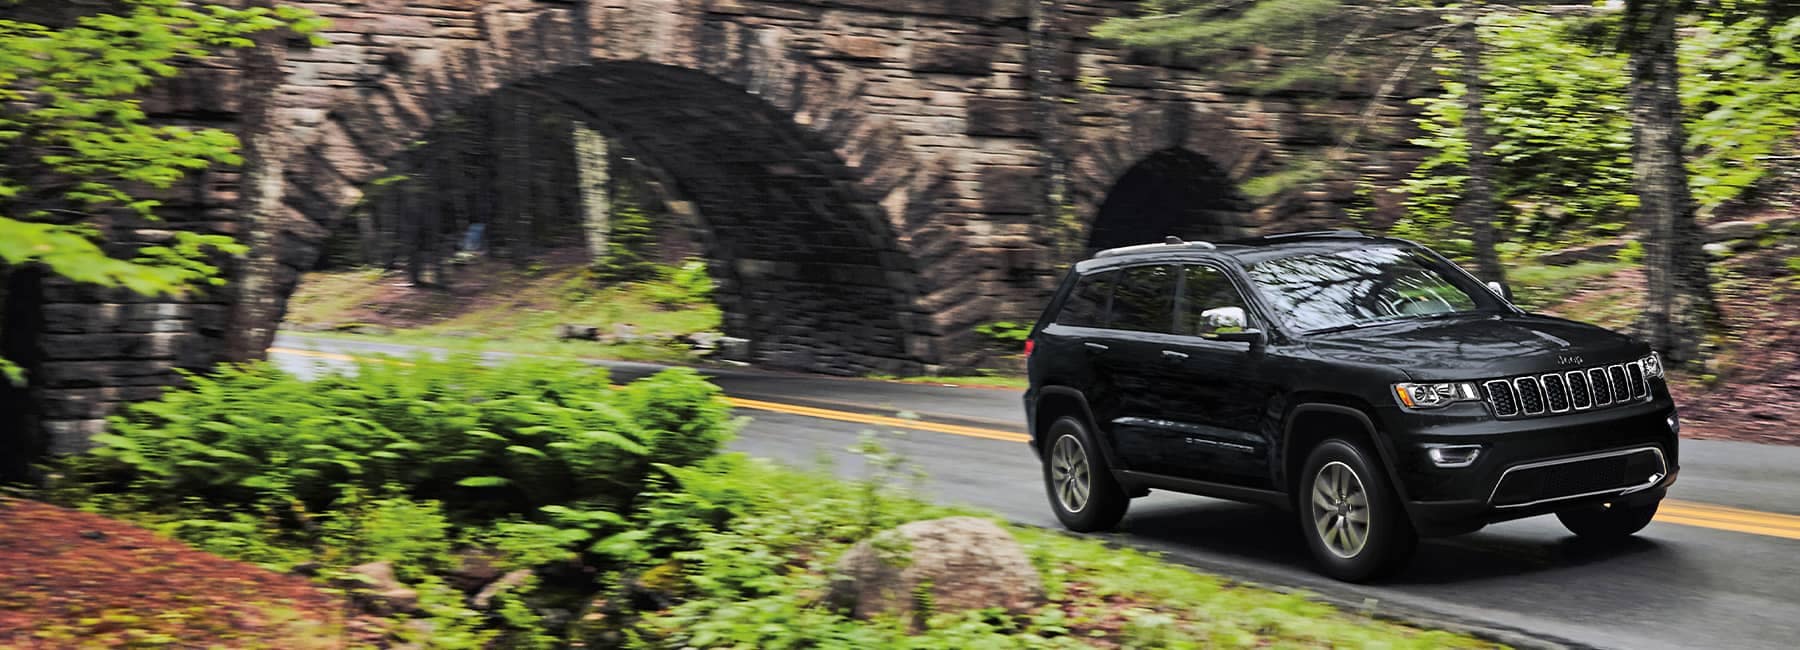 2022 Jeep Grand Cherokee WK Limited driving on forest lined road, with stone bridge behind